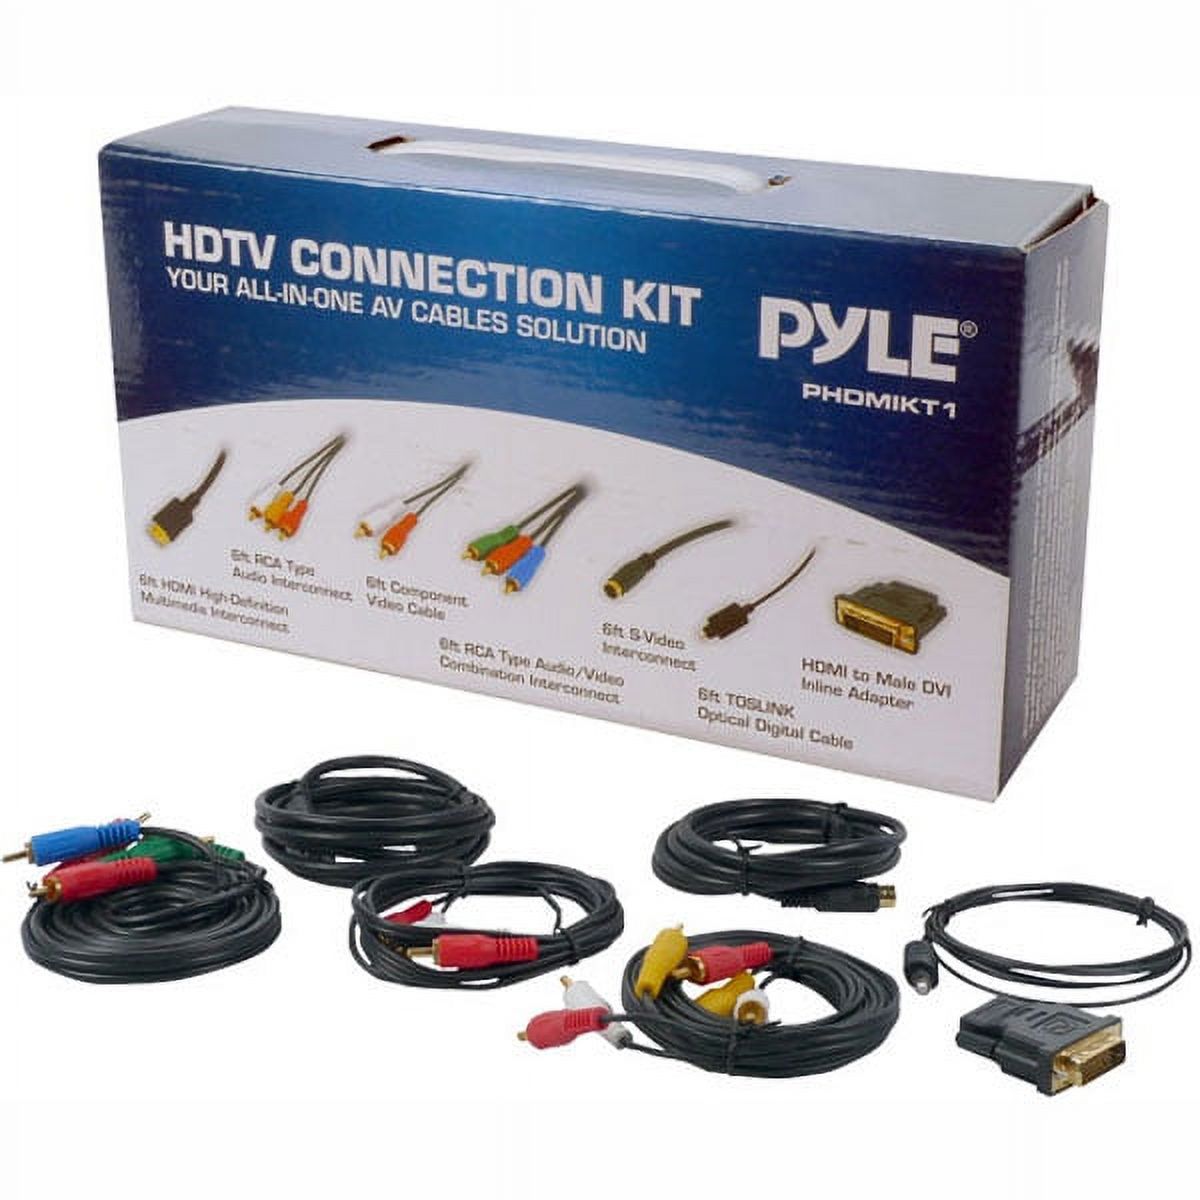 HDTV Audio/Video Cable Connection Kit Compatible with Plasma, LCD/LED/DLP/DVD and Audio Players - image 1 of 1